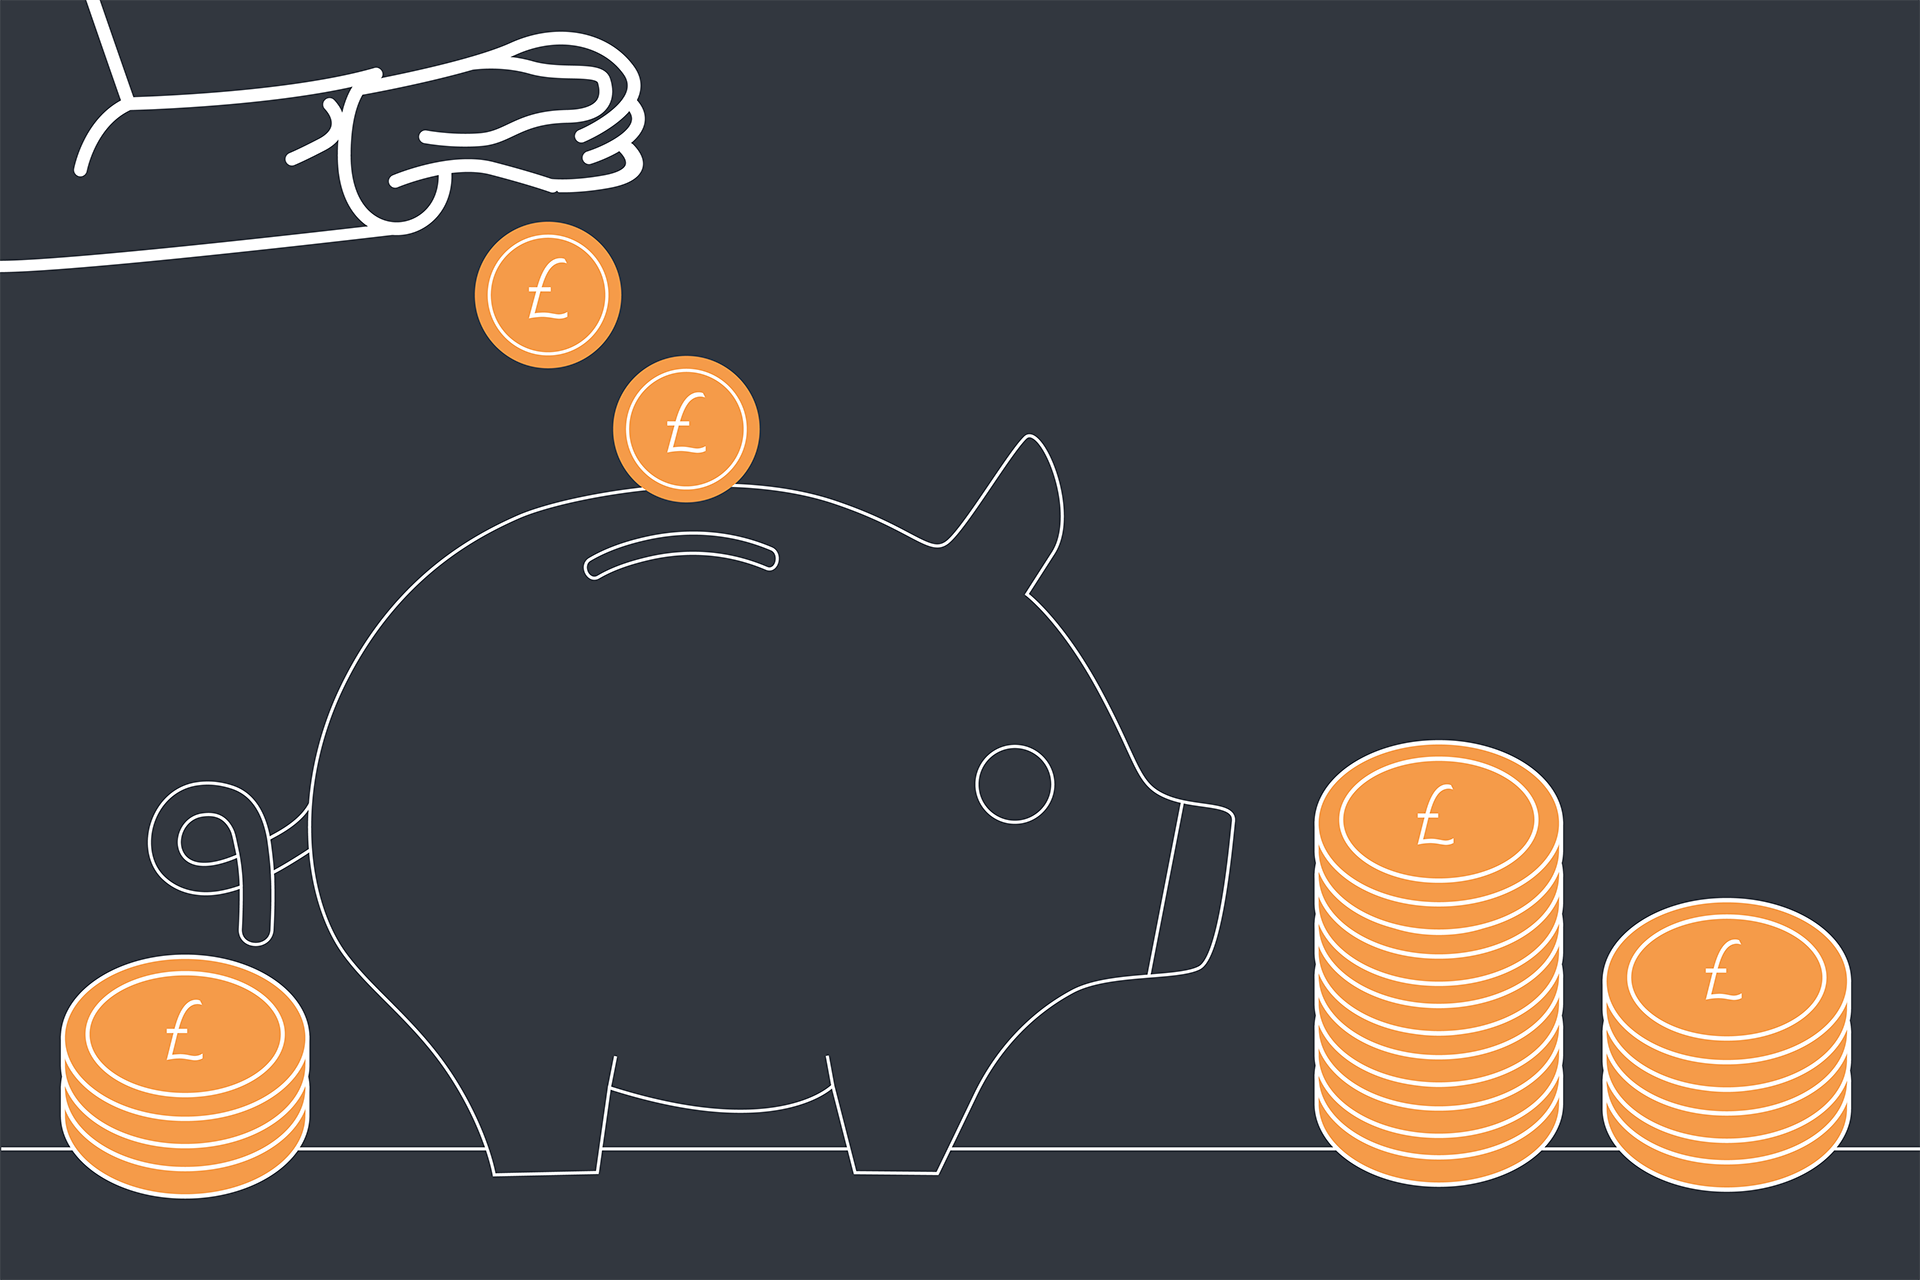 A DD illustration of a hand depositing money into a piggy bank with stacks of coins either side.